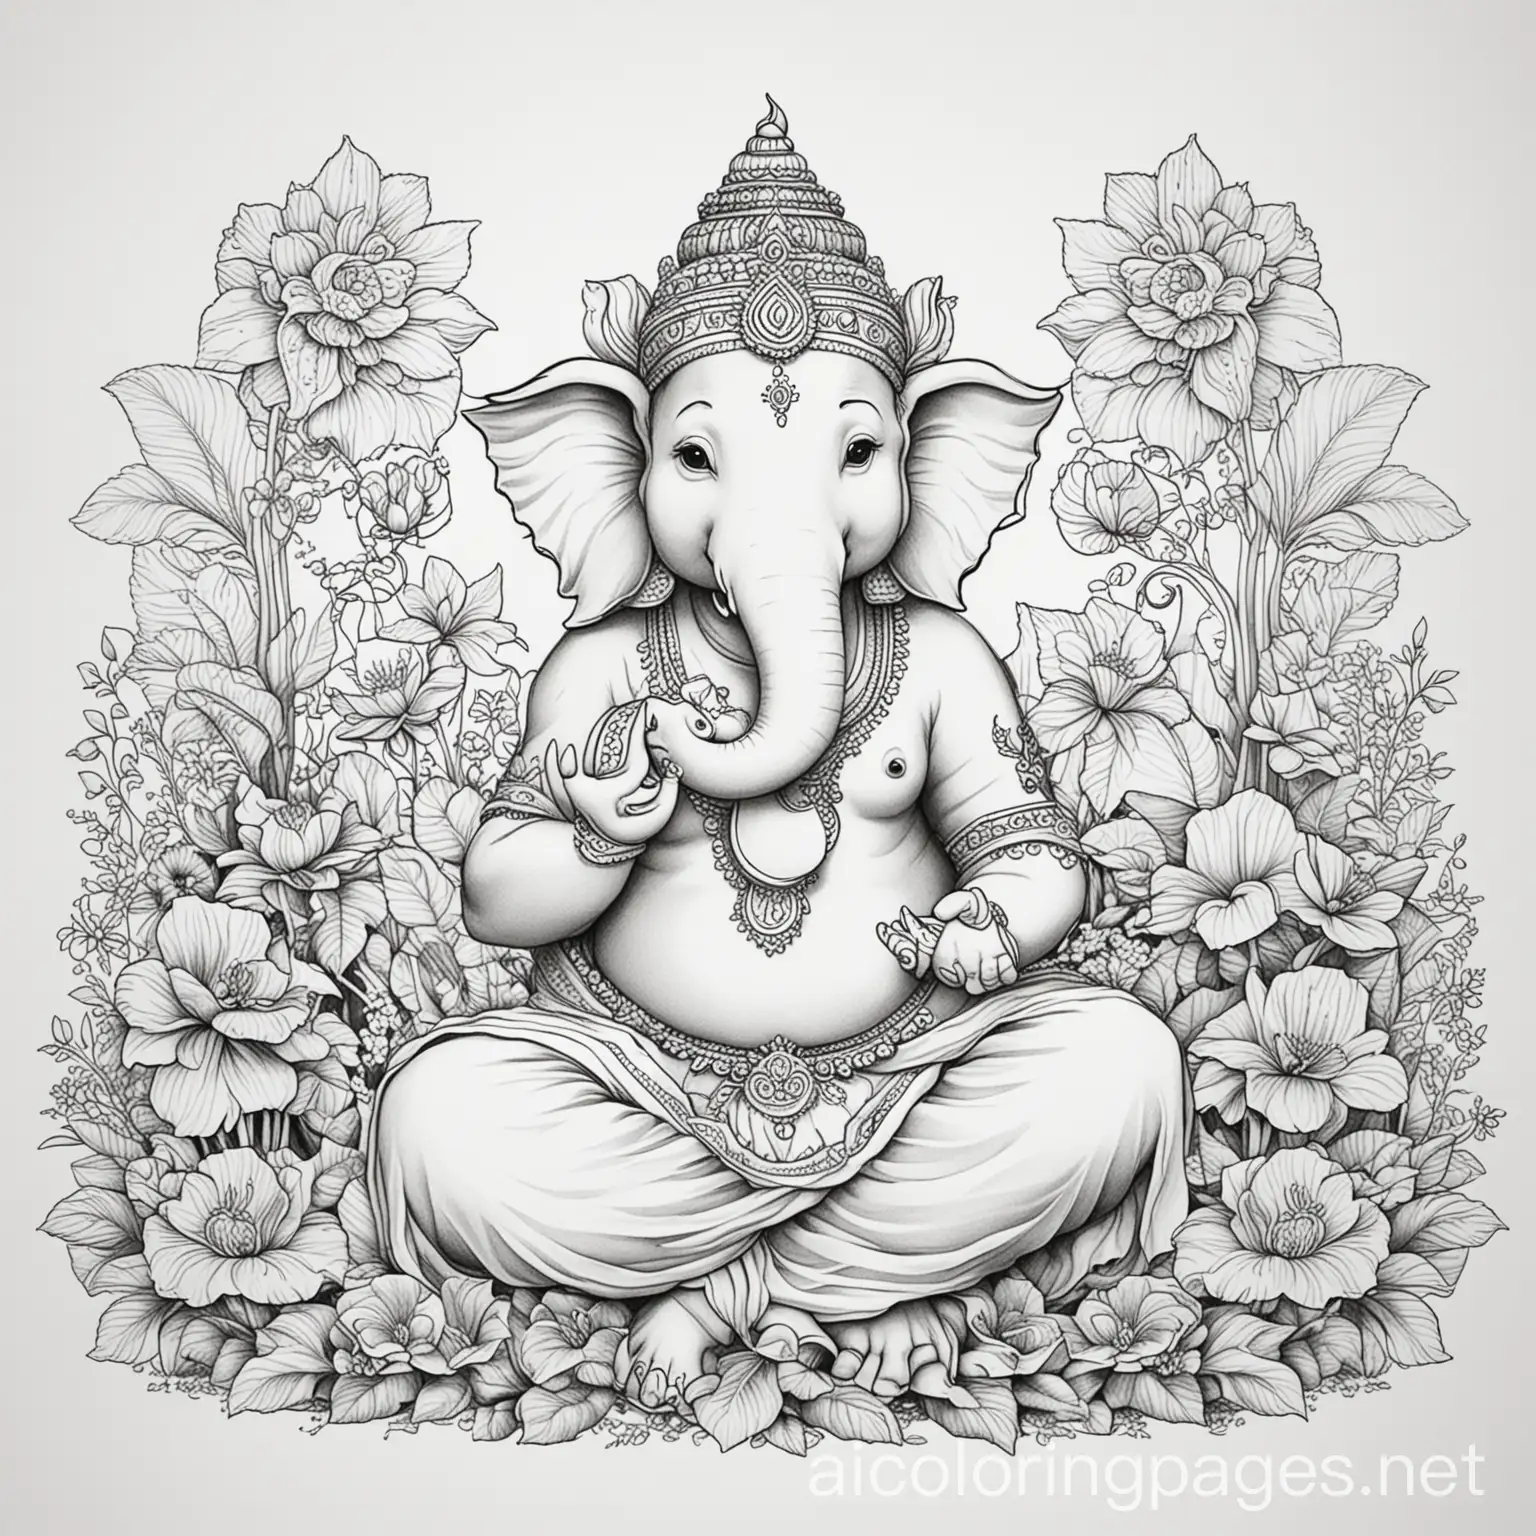 ganesh sitting in a gardenw with flowers around him, Coloring Page, black and white, line art, white background, Simplicity, Ample White Space